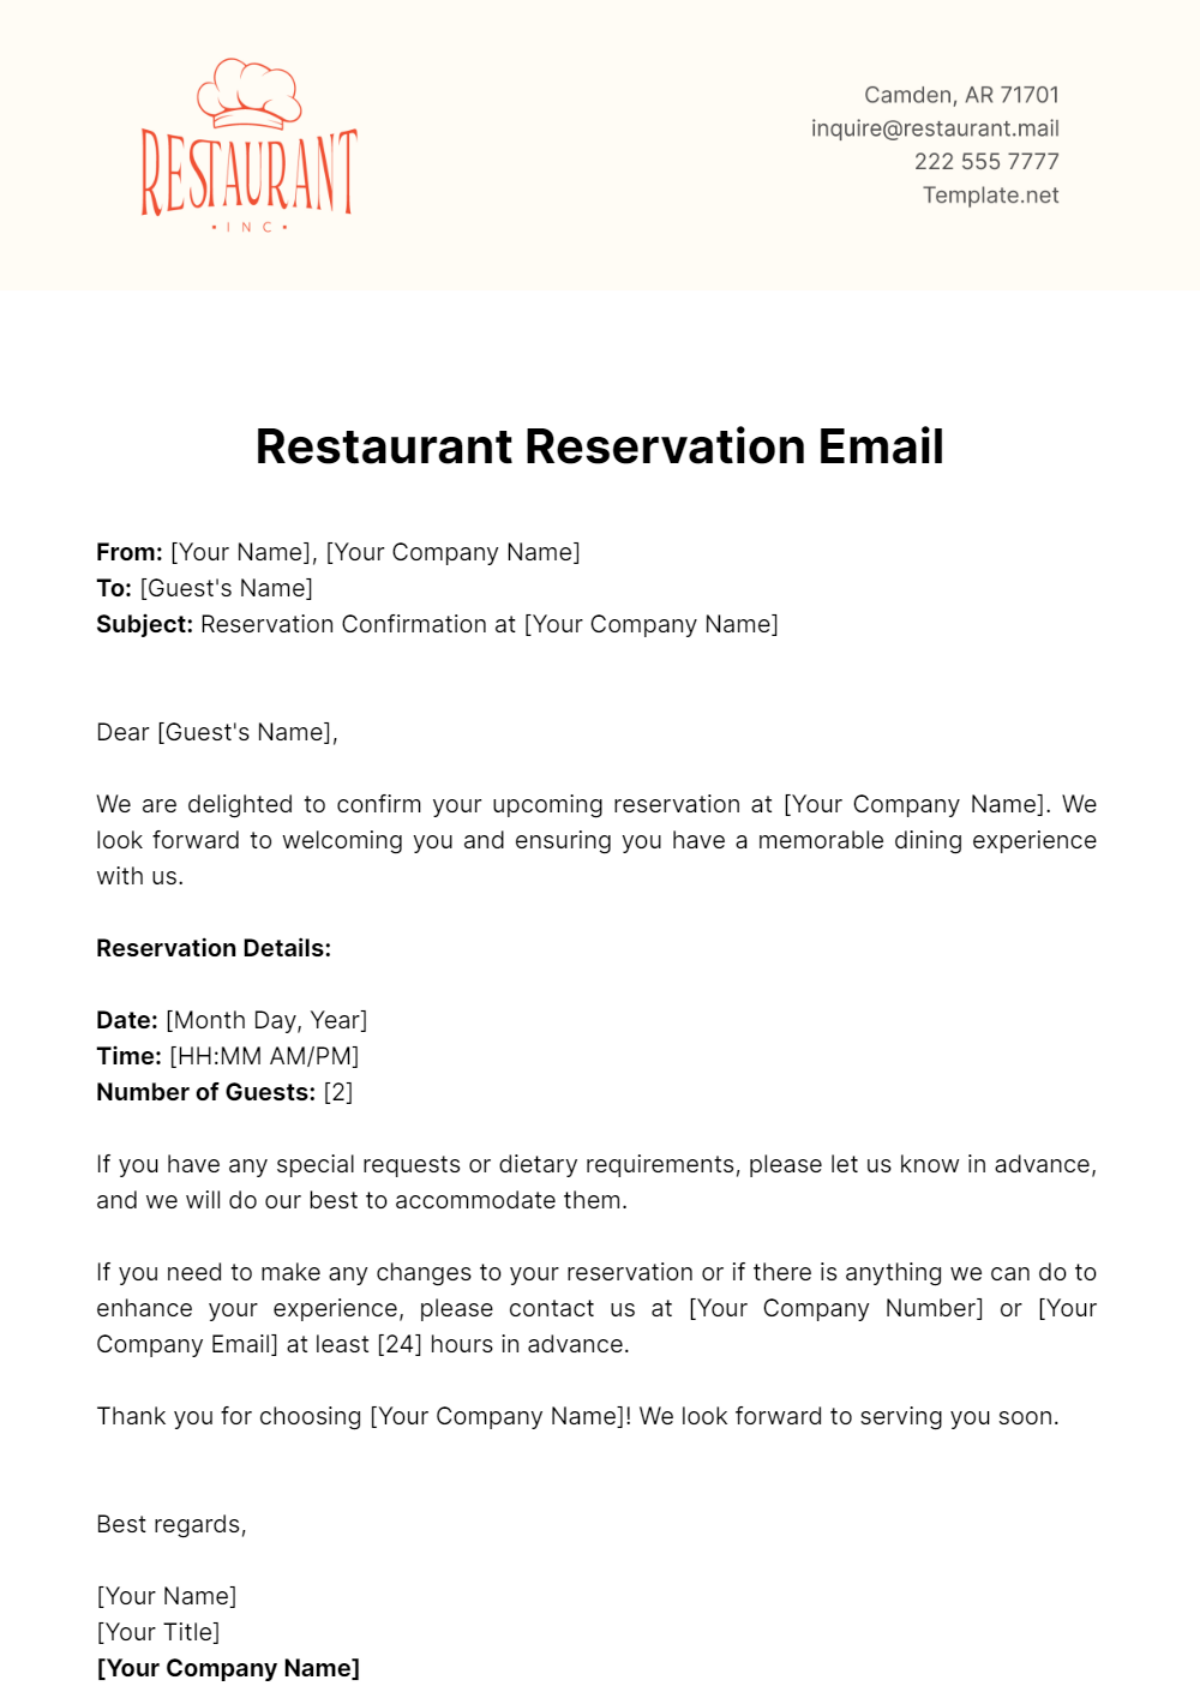 Free Restaurant Reservation Email Template